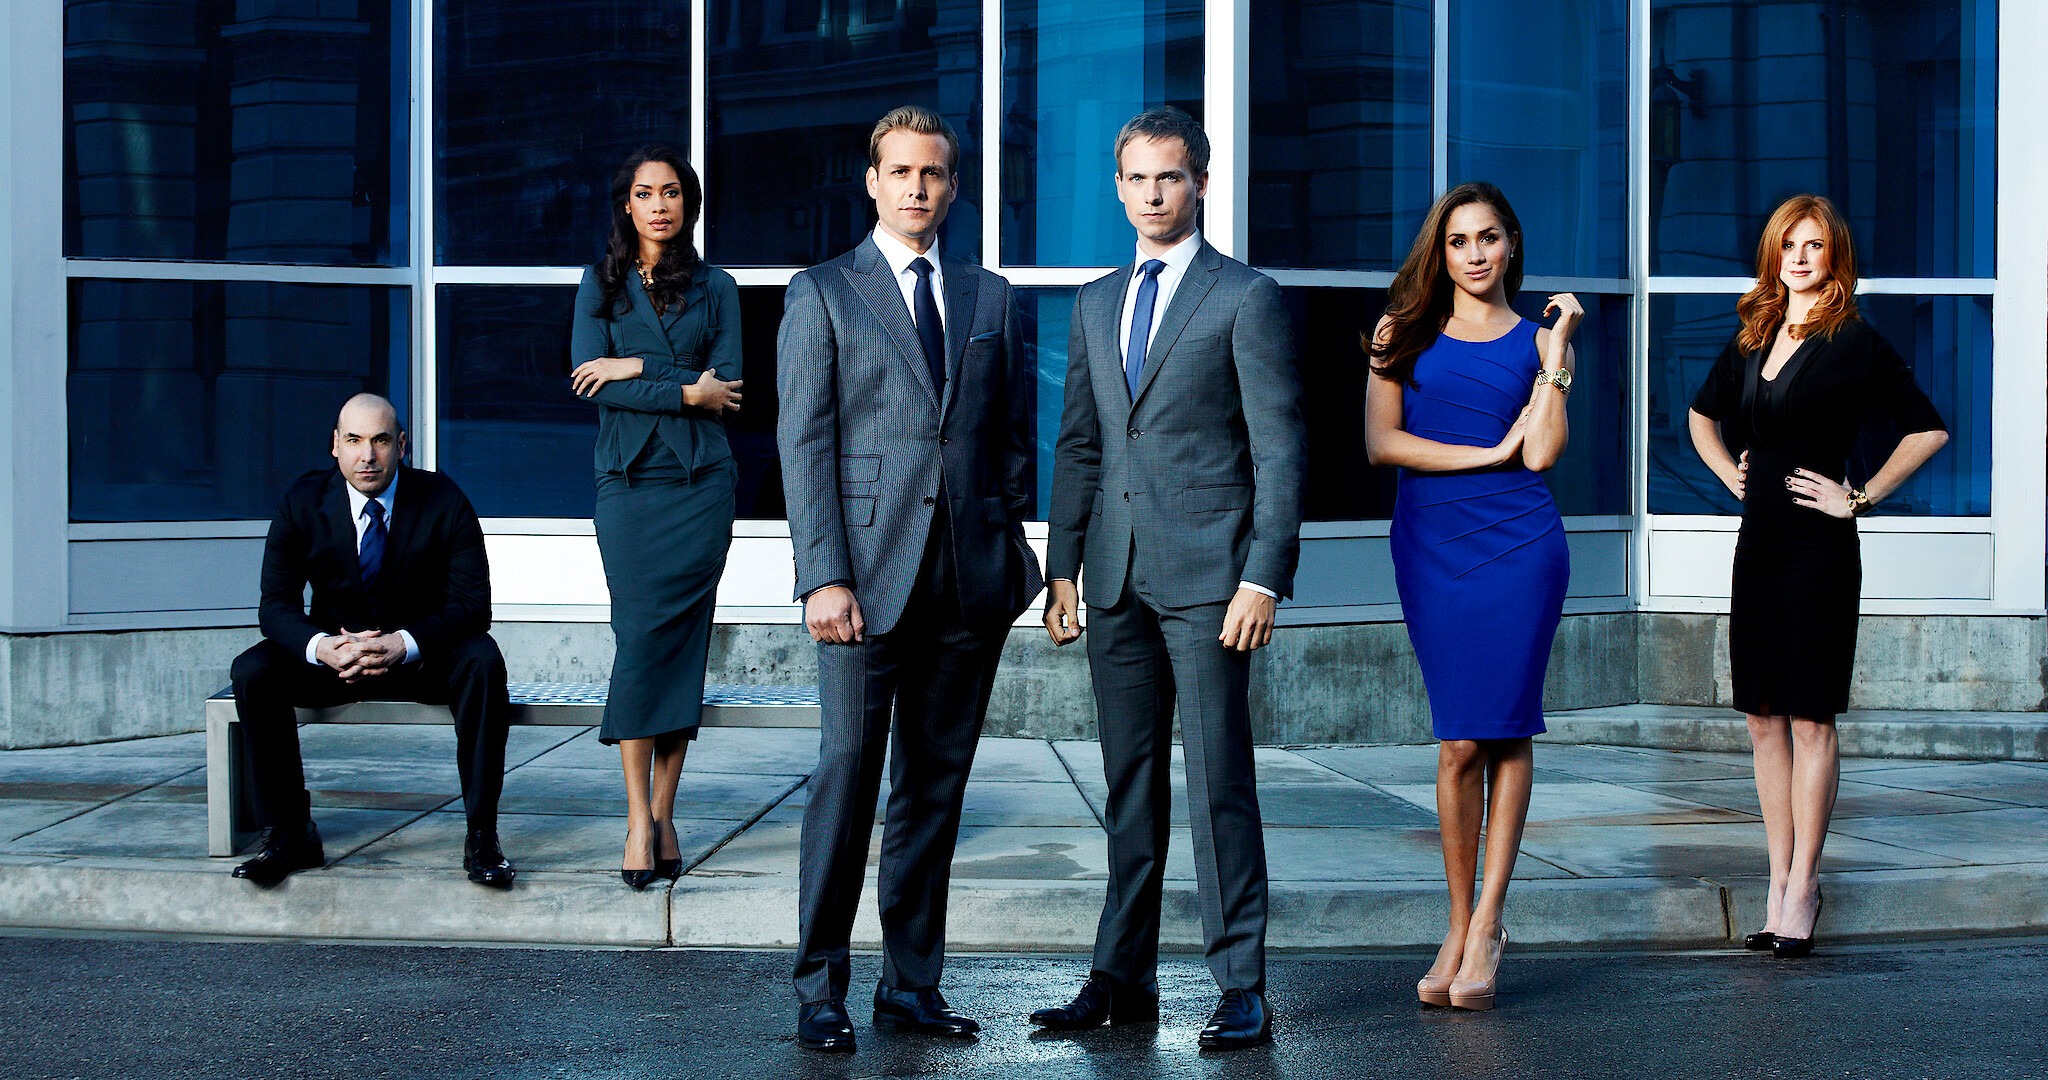 #Suits: Sequel Series in the Works as USA Network Looks to Revive “Blue Skies” Branding